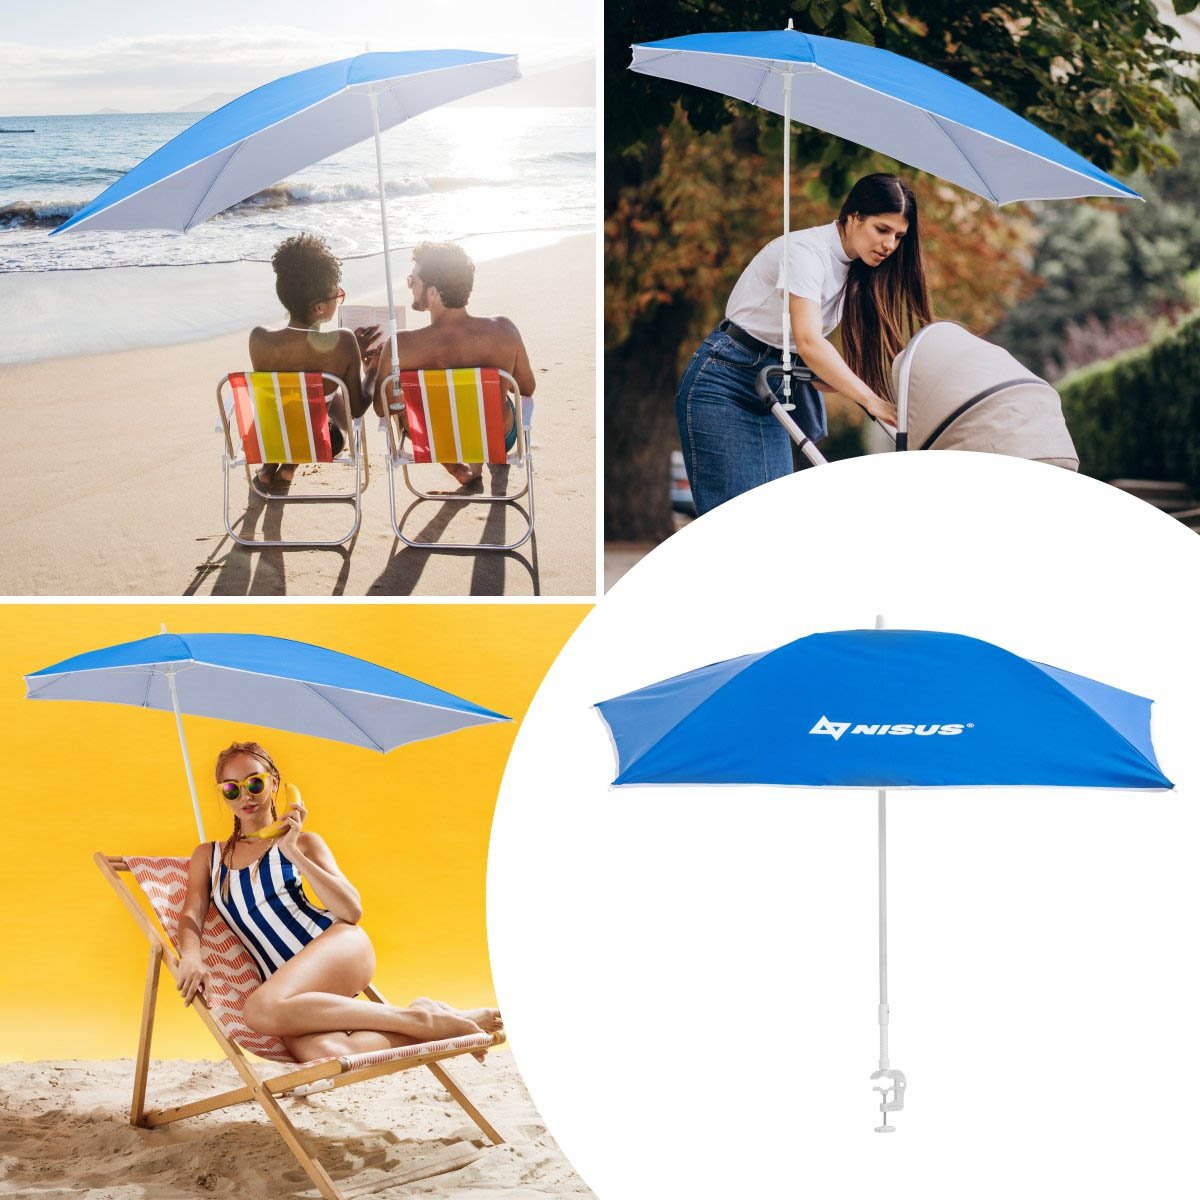 Strong Clip-On Adjustable Beach Umbrella could be used in a plenty of activities and places